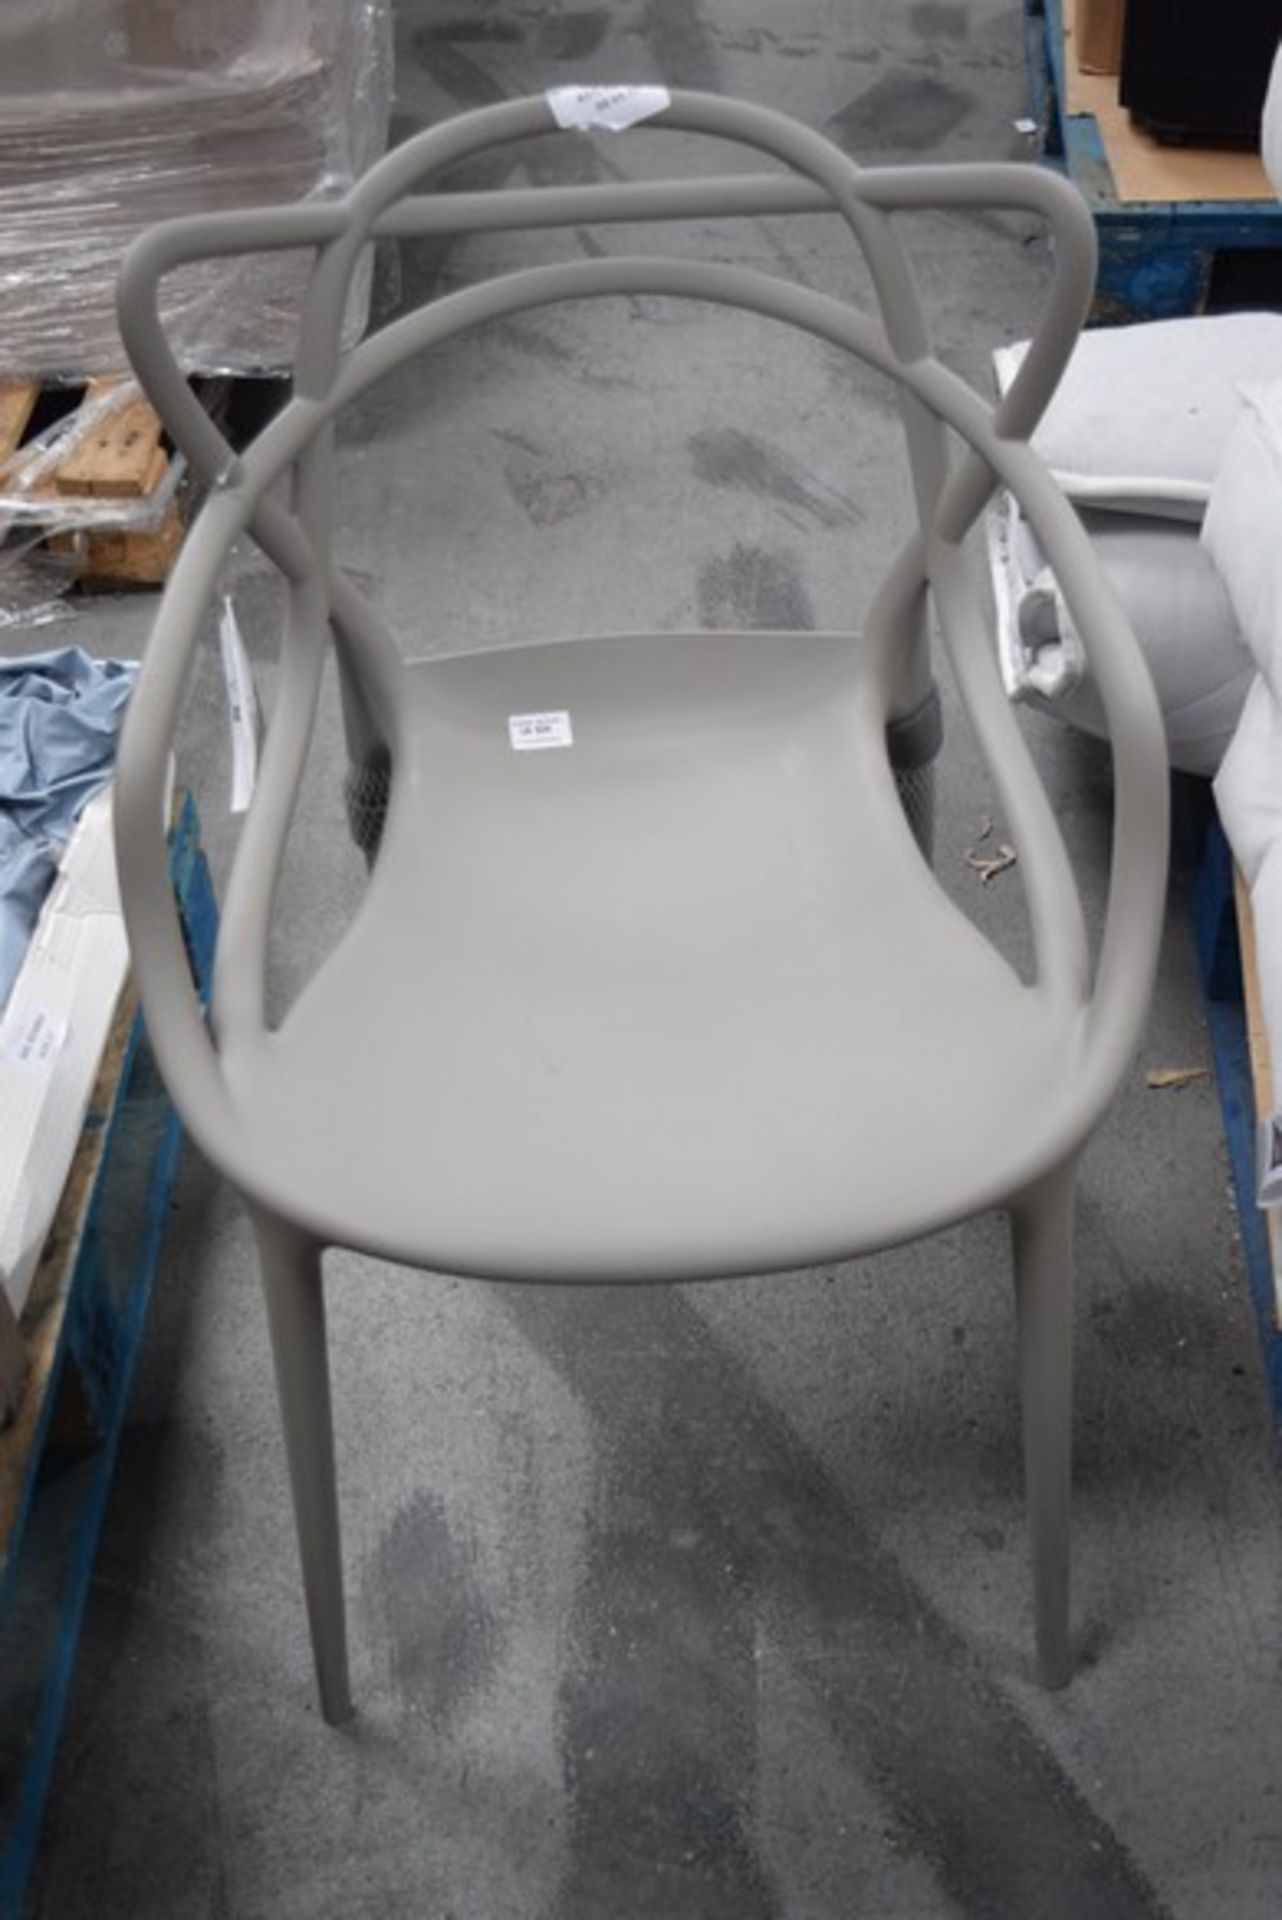 1 x KARTELL PHILIPPE STARK FOR KARTELL MASTERS CHAIR RRP £160 09.05.2017 *PLEASE NOTE THAT THE BID